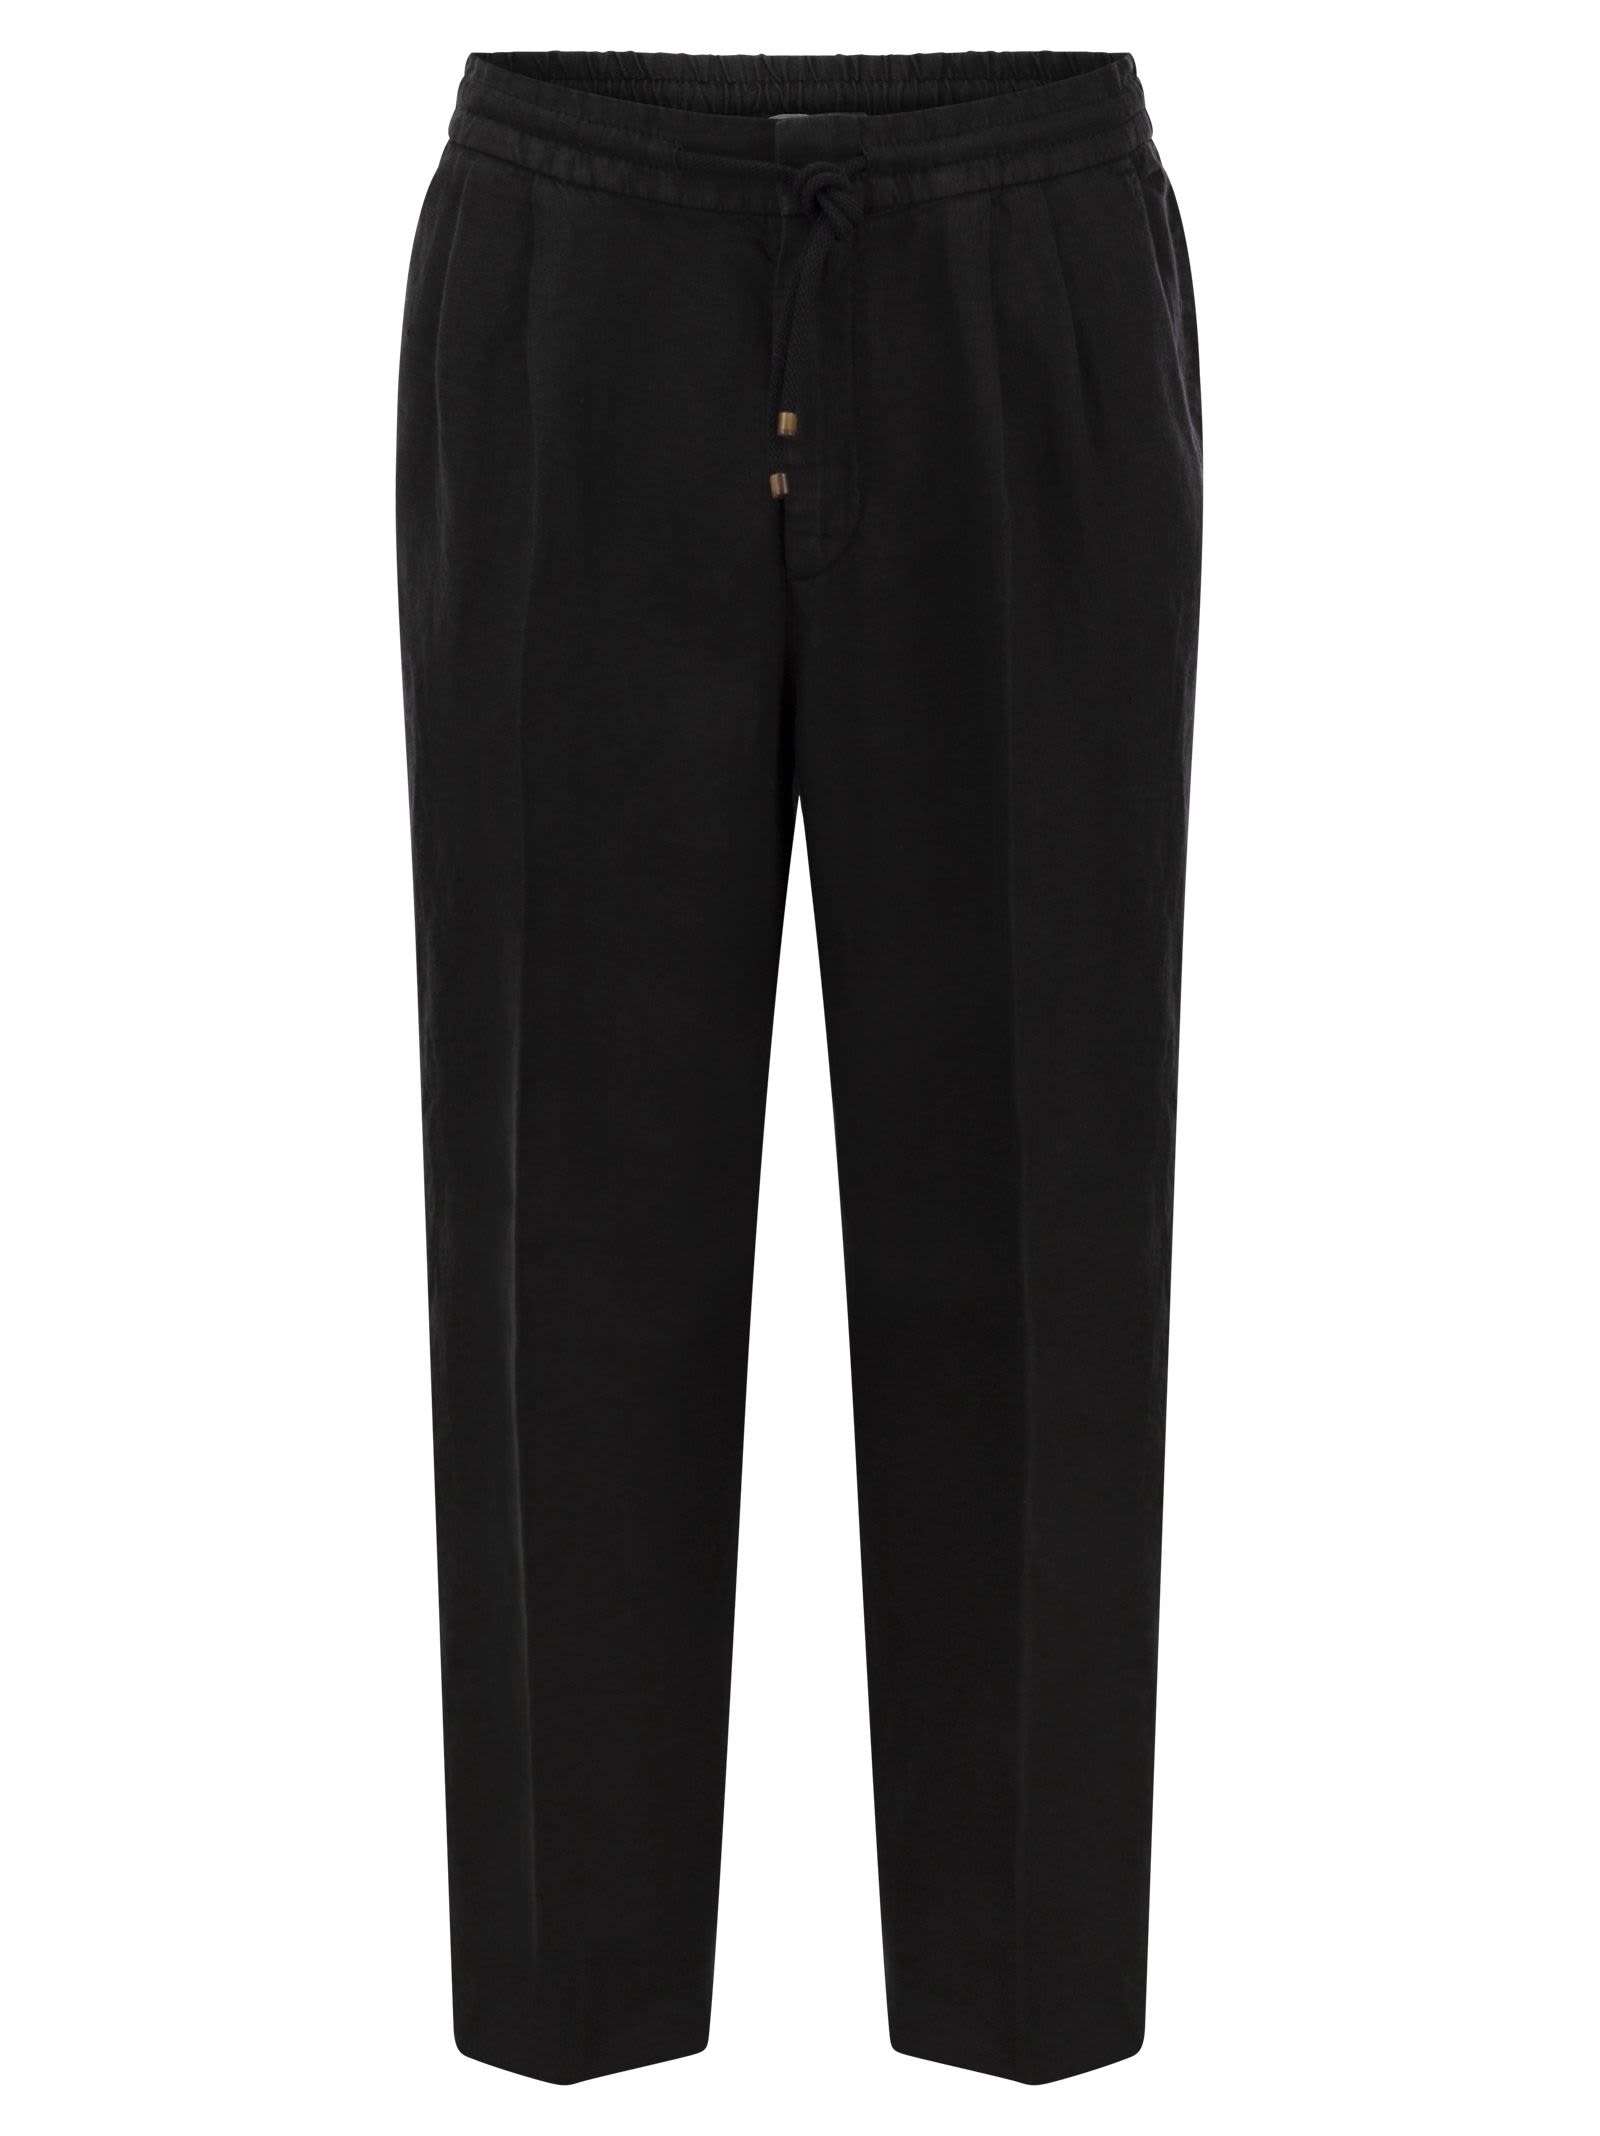 BRUNELLO CUCINELLI LEISURE FIT TROUSERS IN GARMENT-DYED LINEN GABARDINE WITH DRAWSTRING AND DOUBLE DARTS